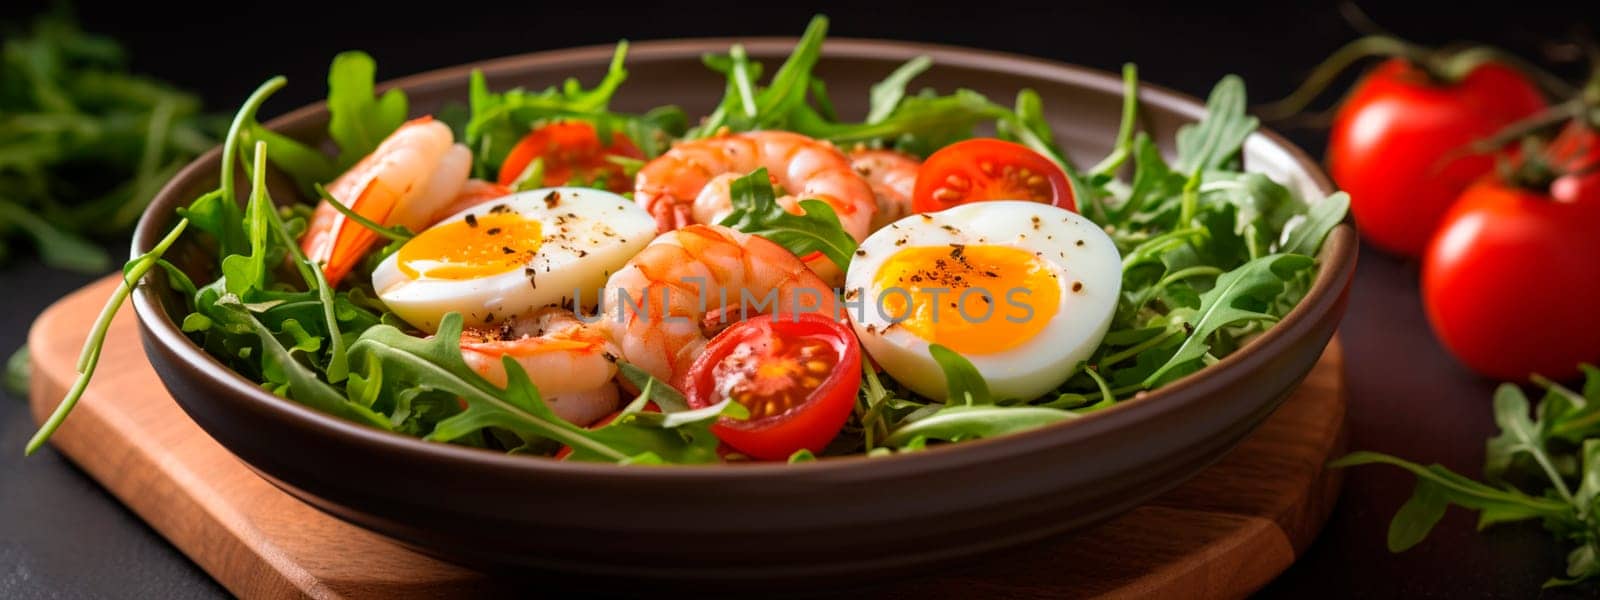 Salad with egg in a plate. Selective focus. Food.